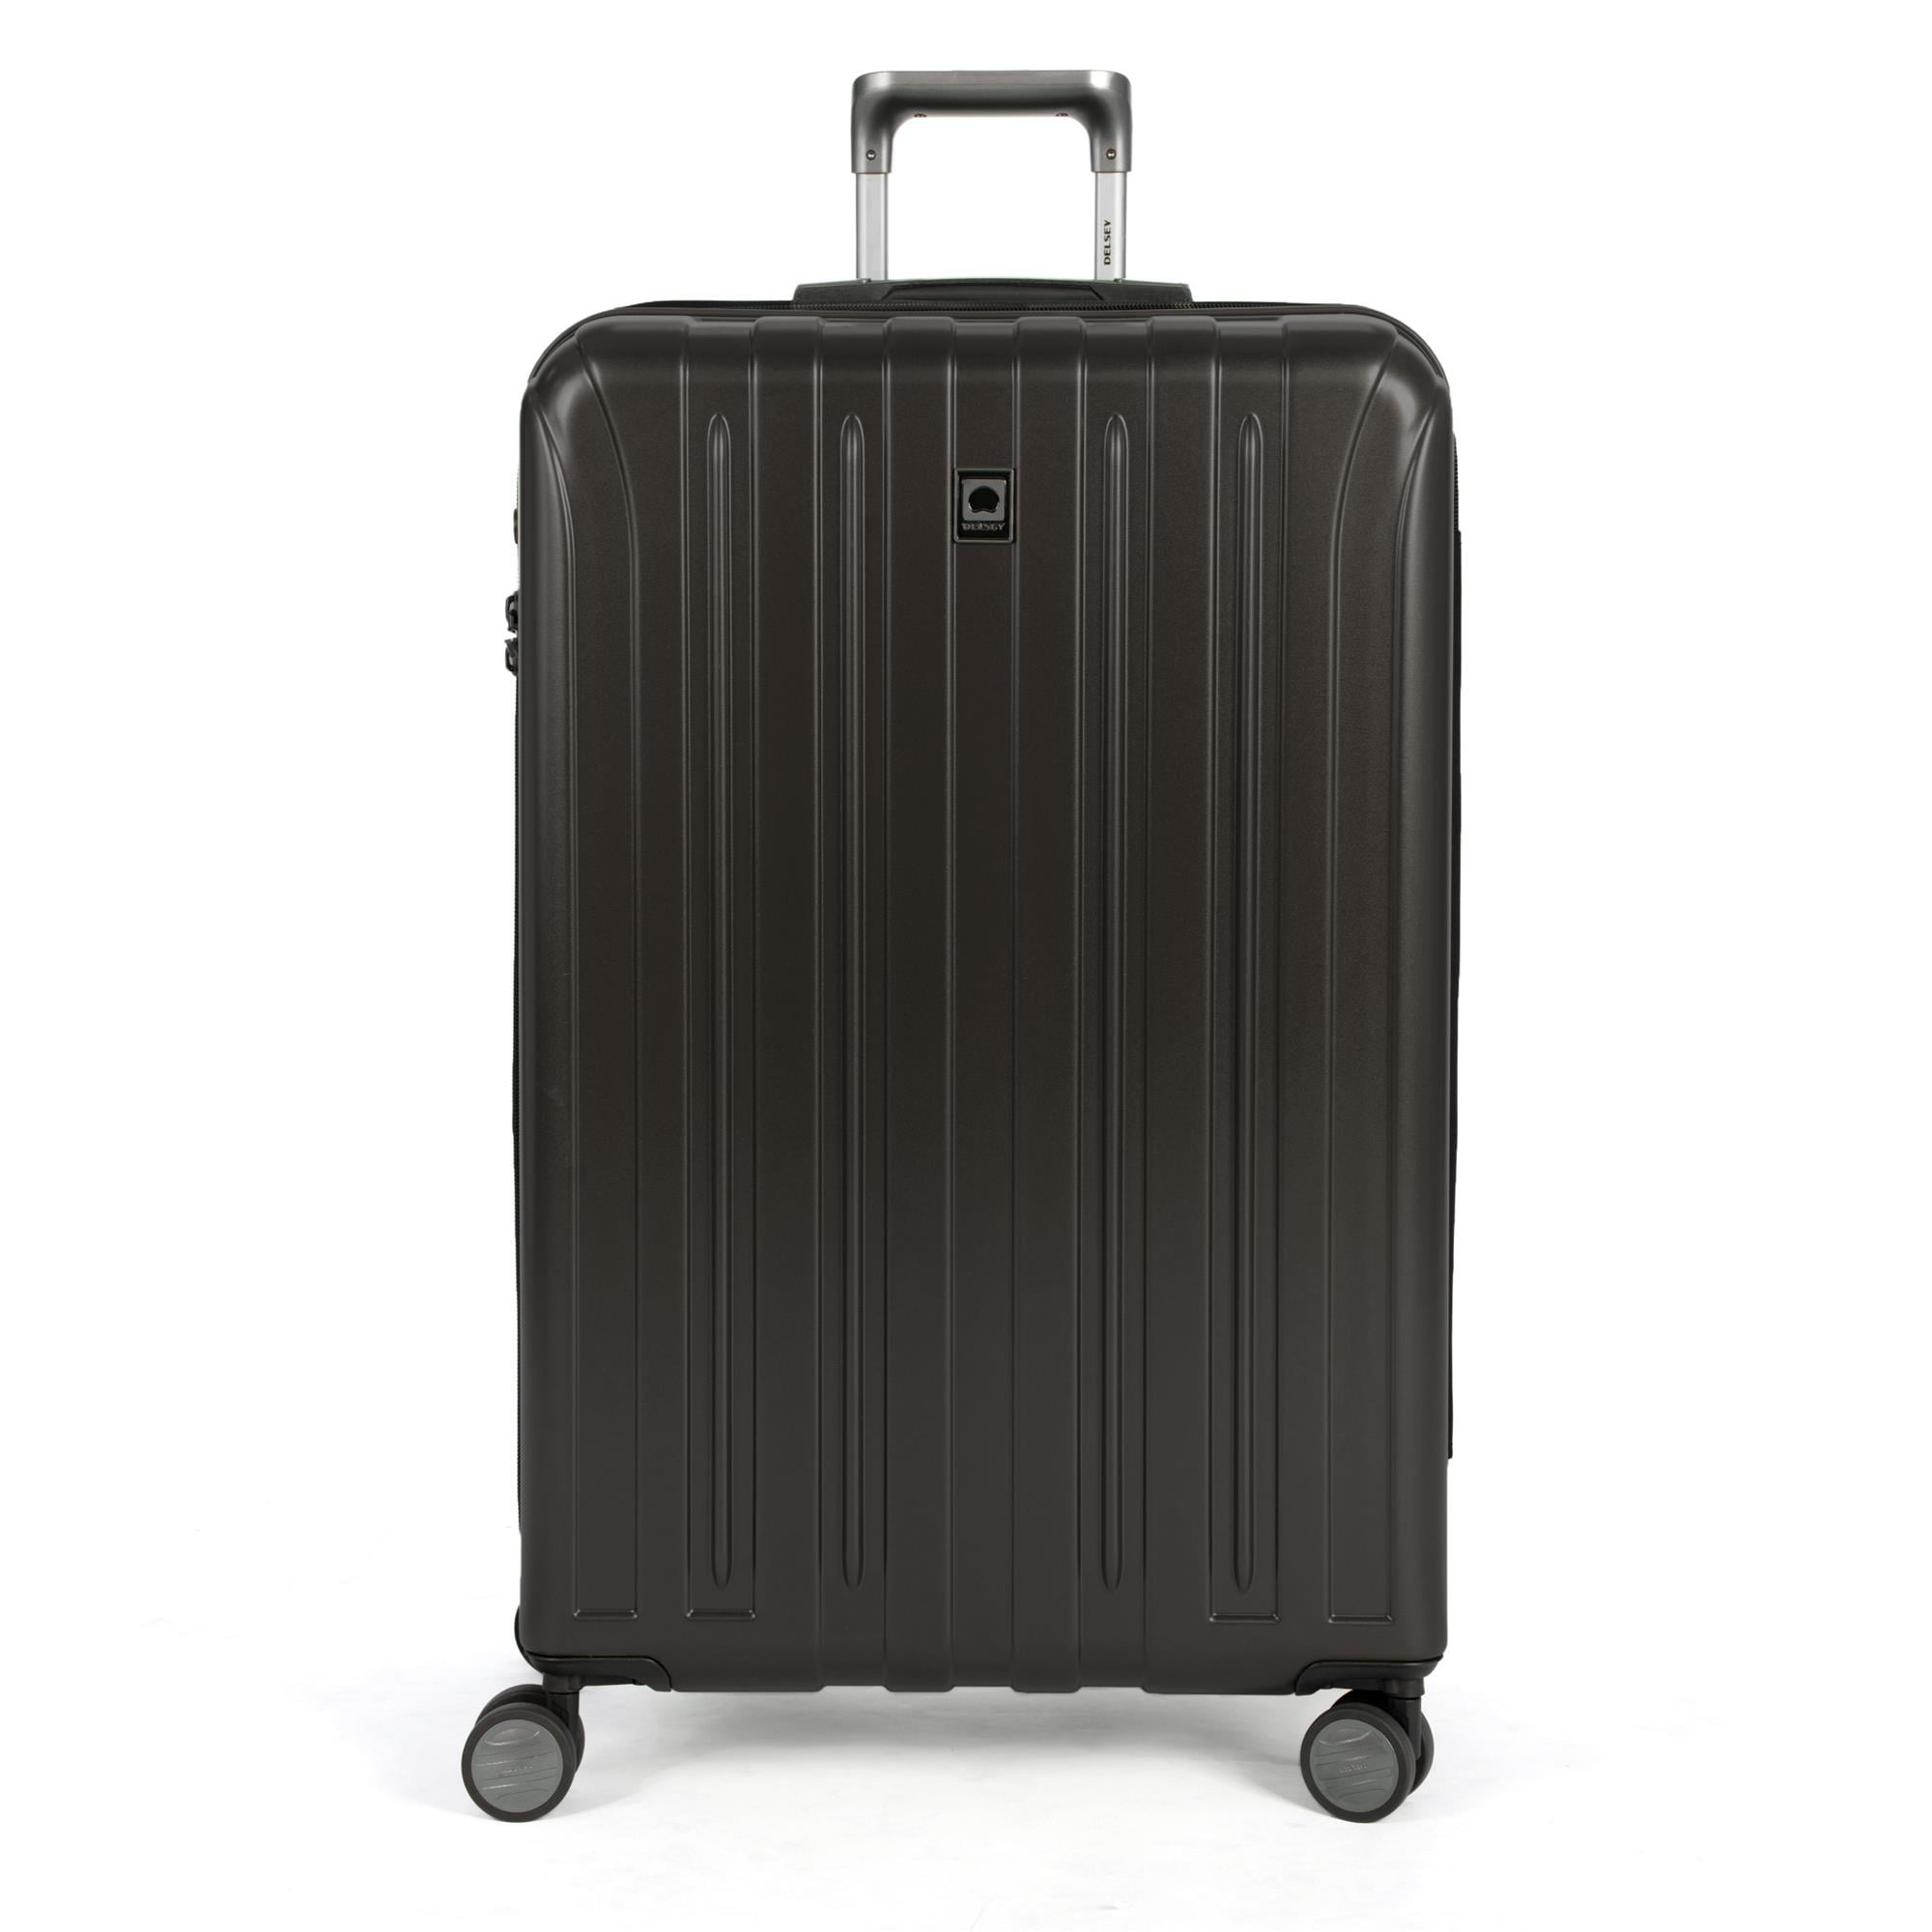 delsey air armour hardside spinner luggage